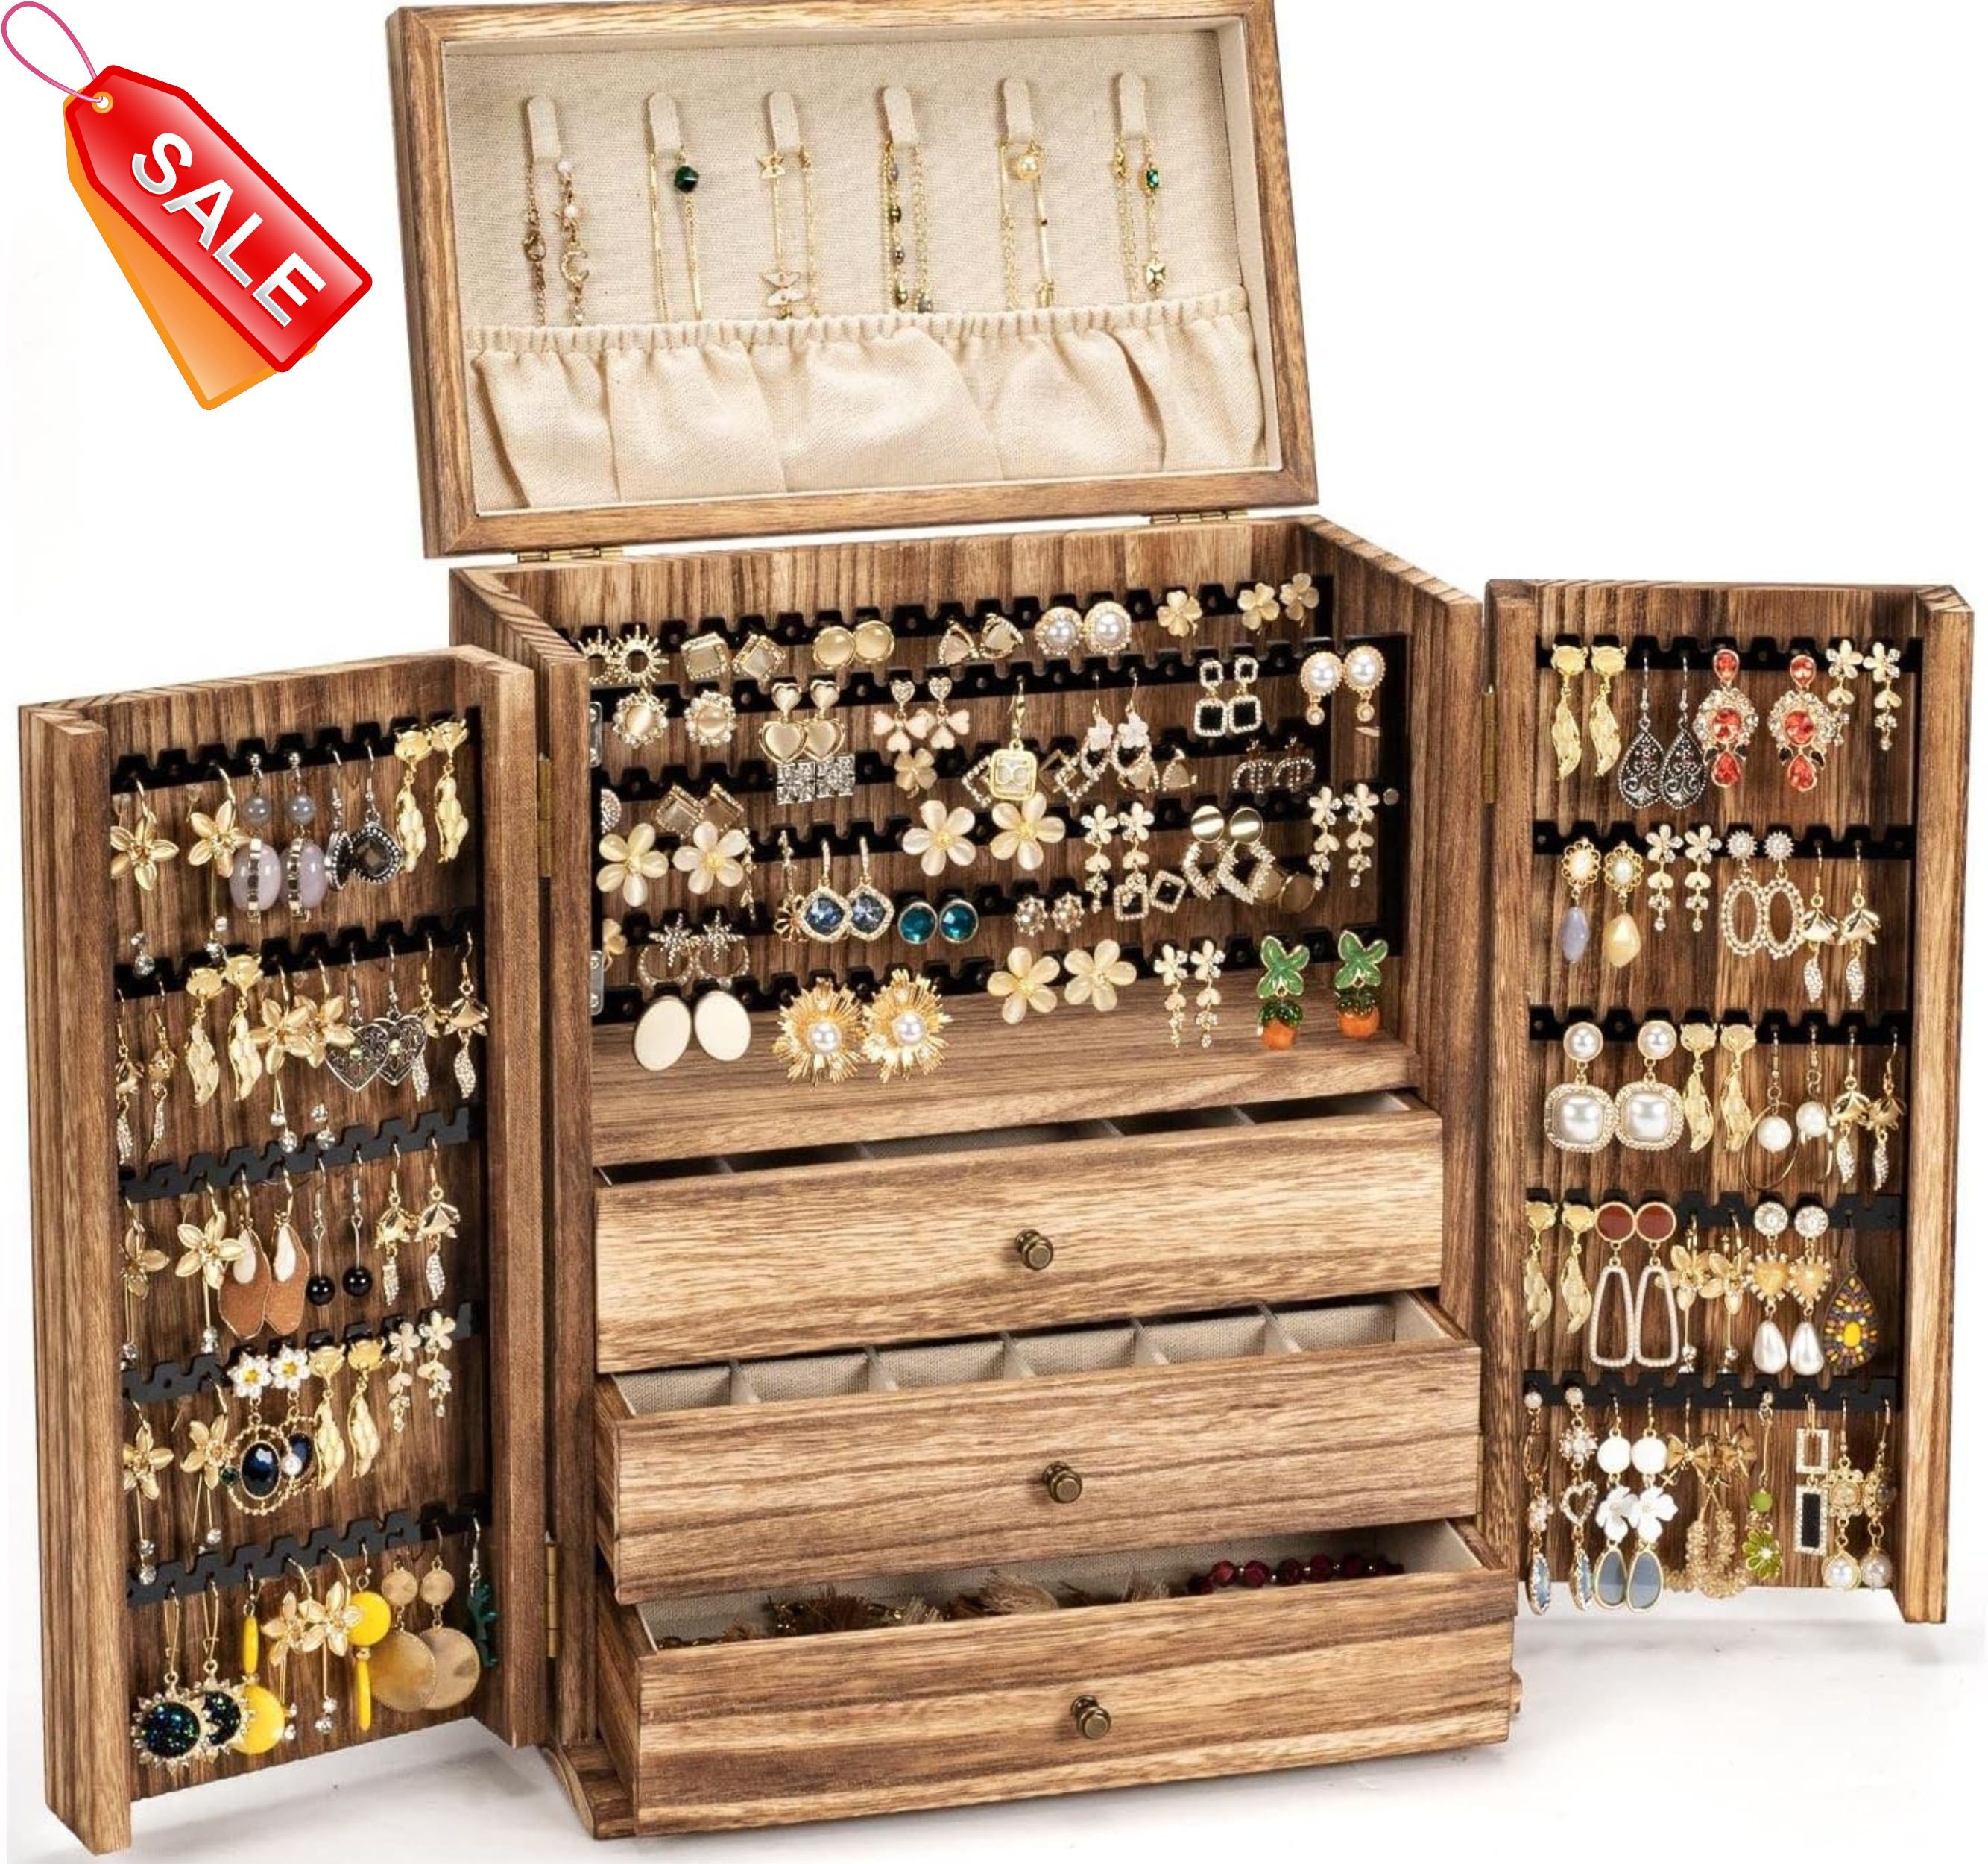 Jewelry Storage Organizer Large Display for Pads and Other Inserts. 